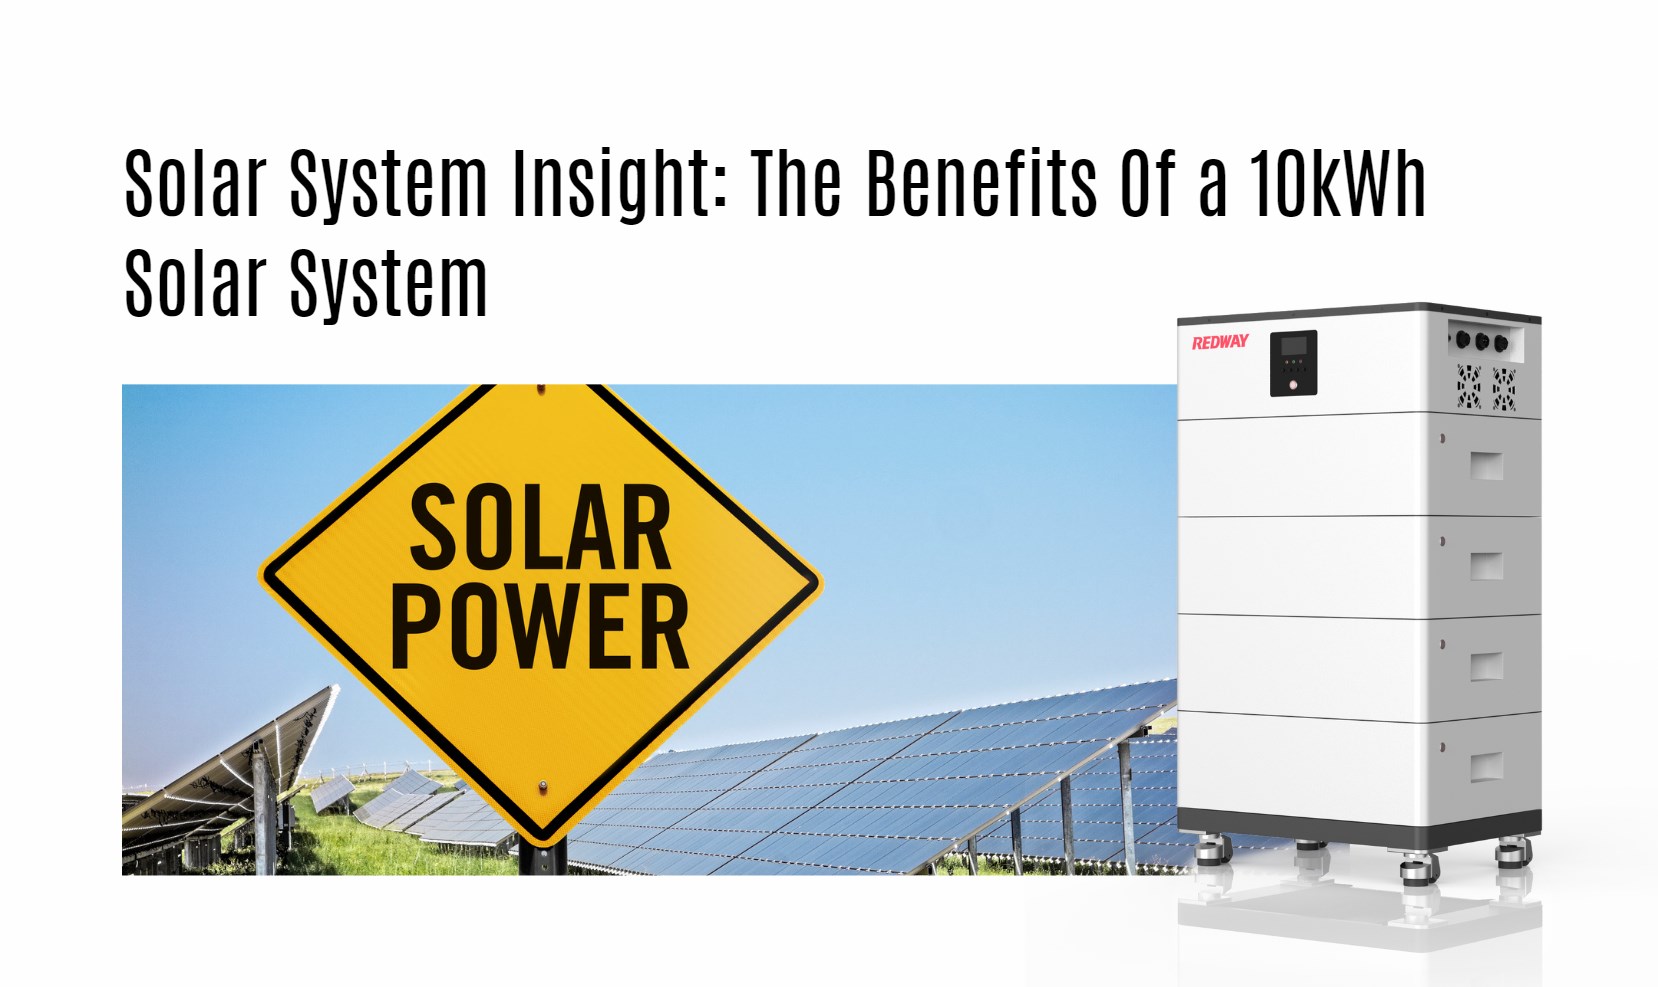 Solar System Insight: The Benefits Of a 10 kWh Solar System. powerall all-in-one home ess lithium battery factory 20kwh 30kwh